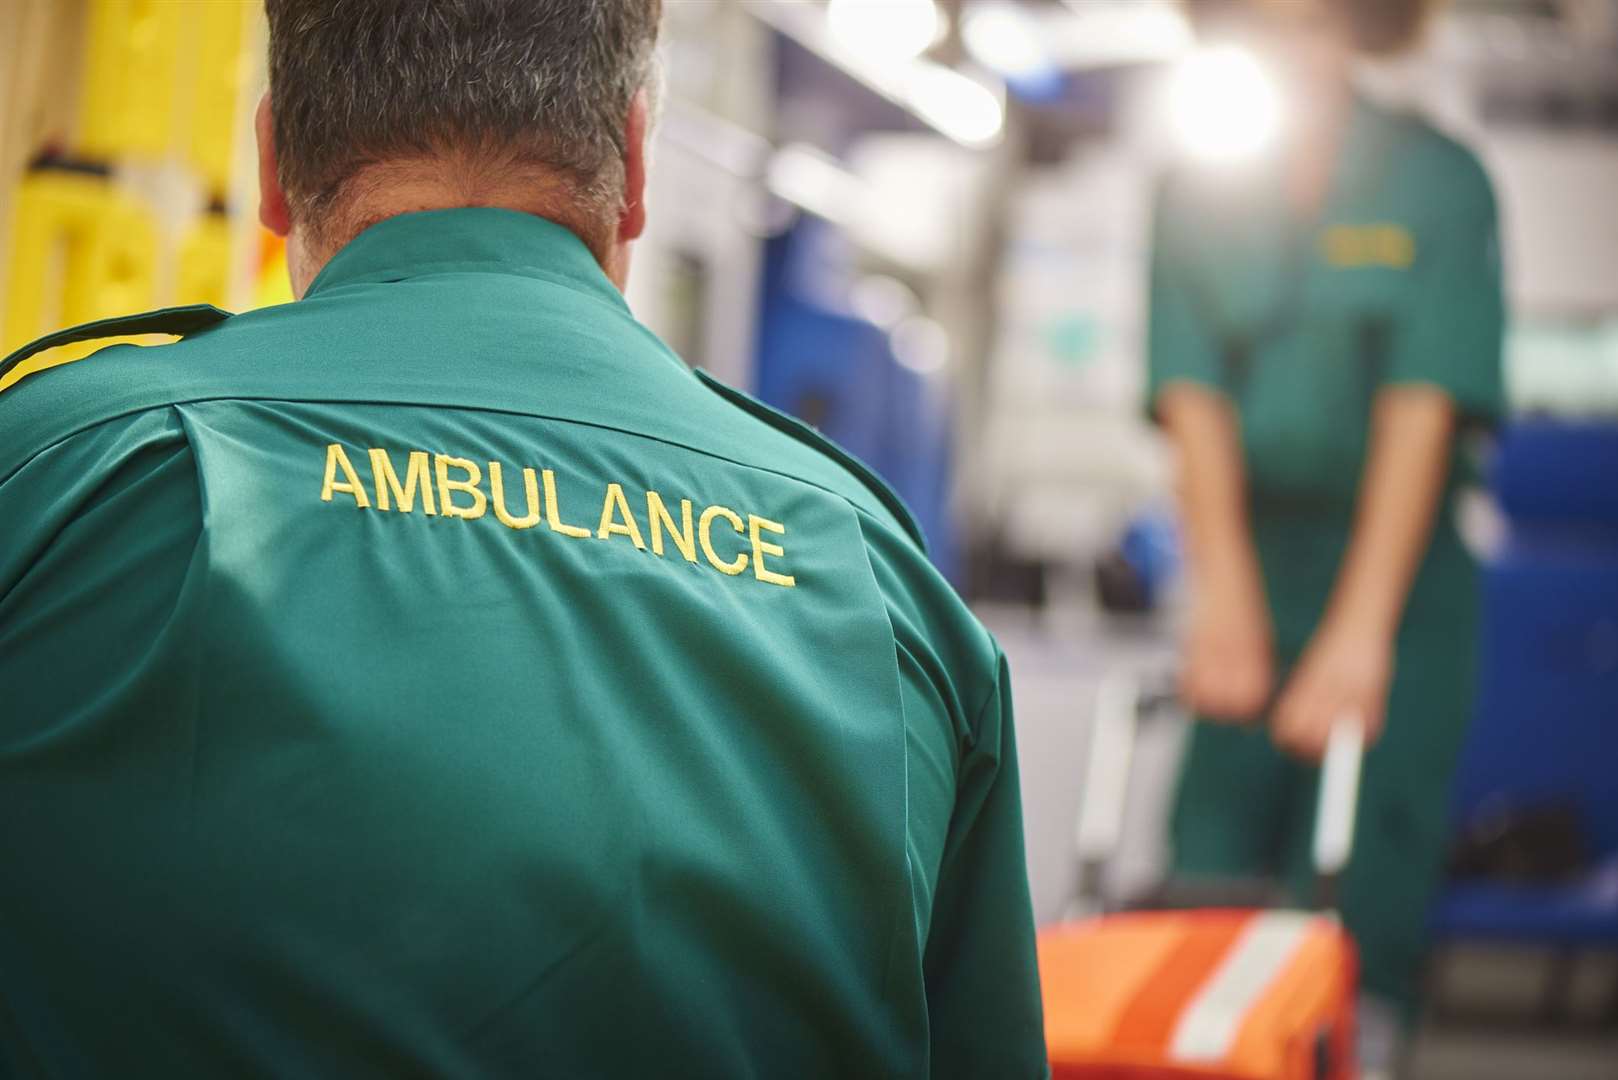 Ambulance services say delays off-loading patients at hospital are part of the problem